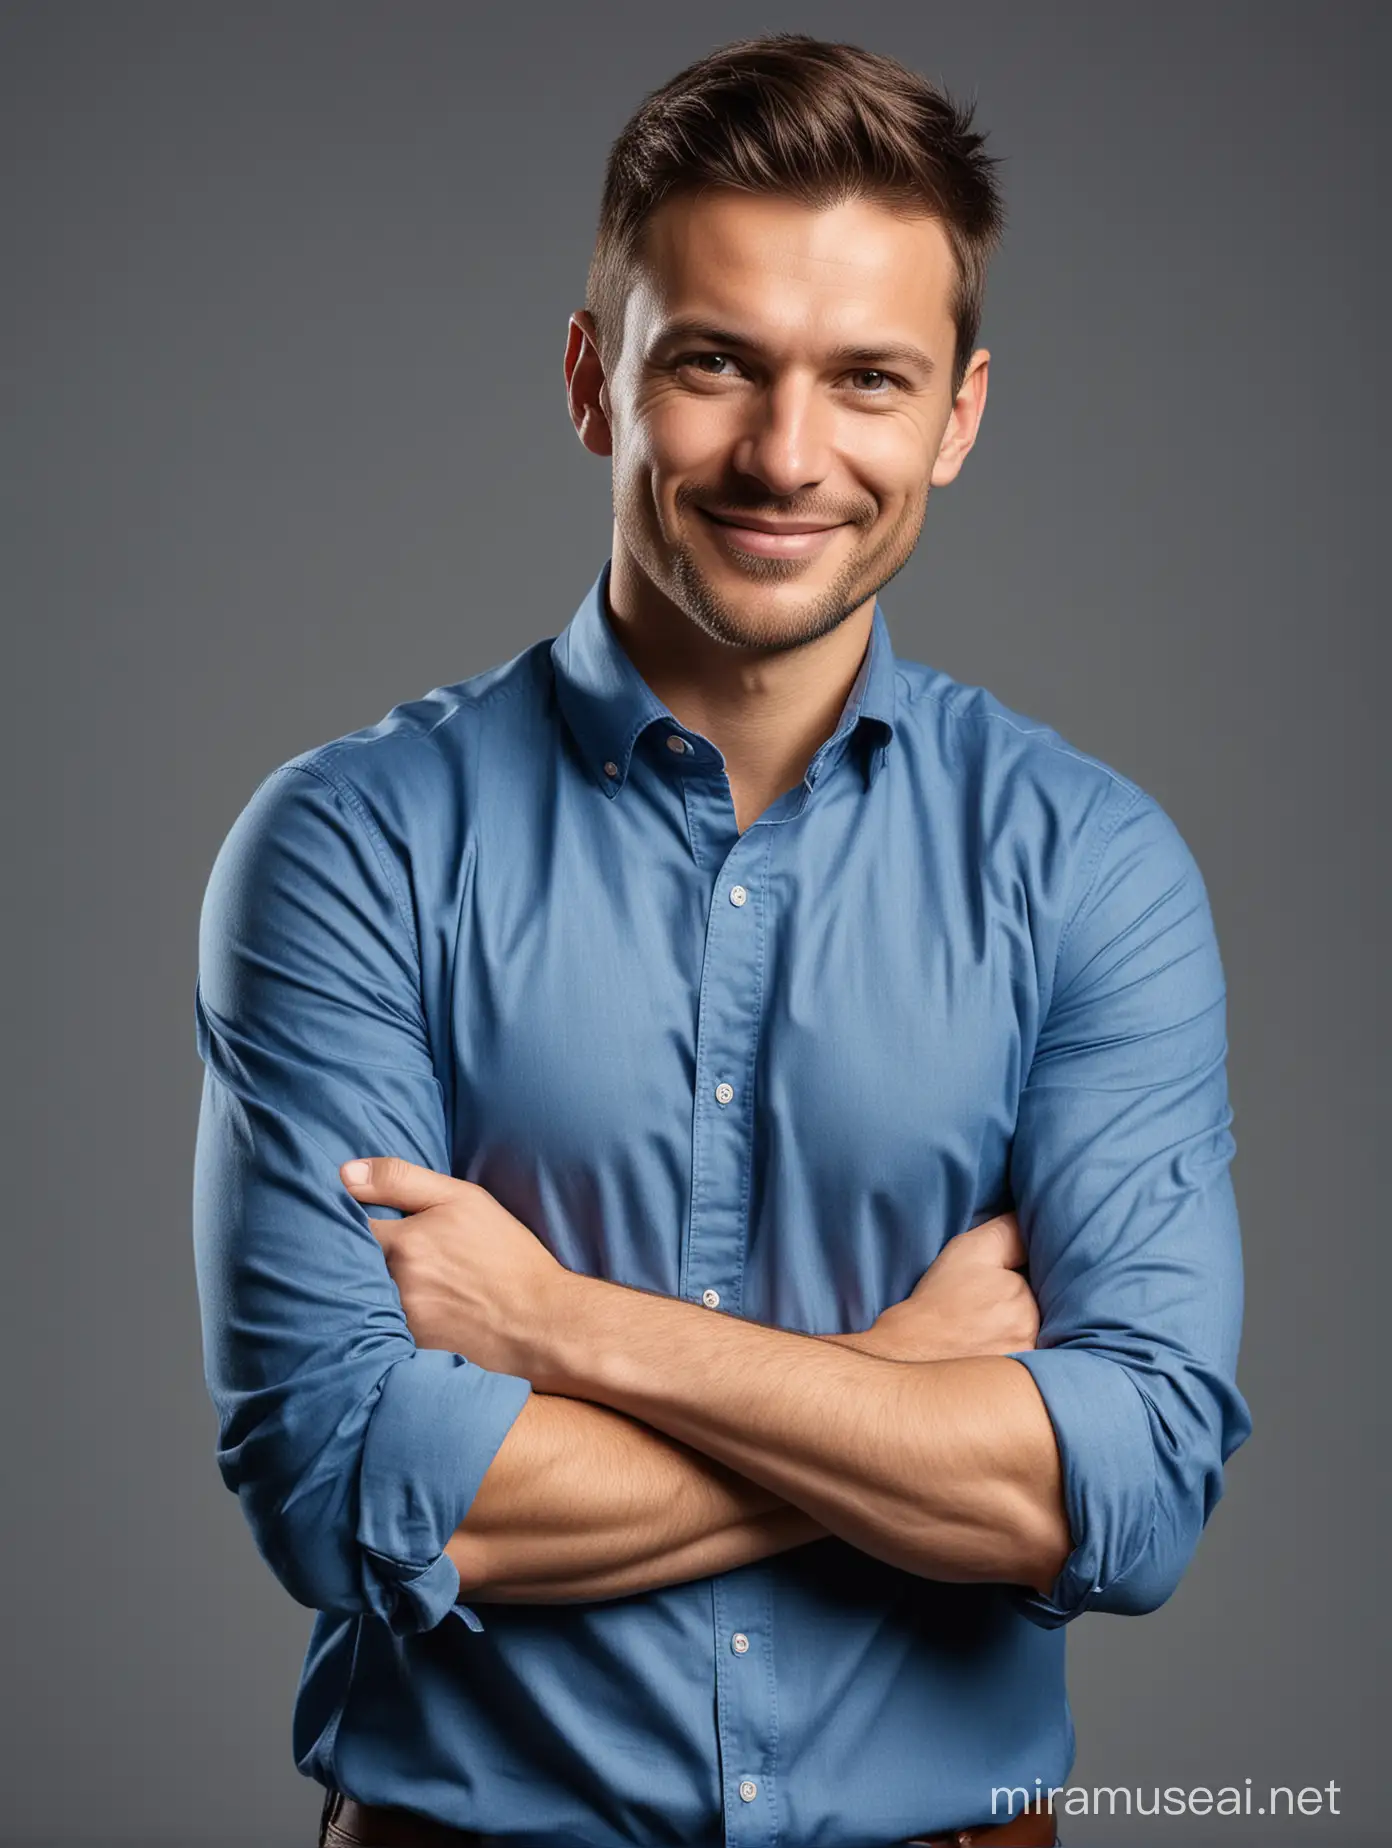 business photography of the full body of a man in a blue shirt, with his arms crossed on his chest. a confident and smiling Polish man without retouching and without facial hair shot canon 50mm

